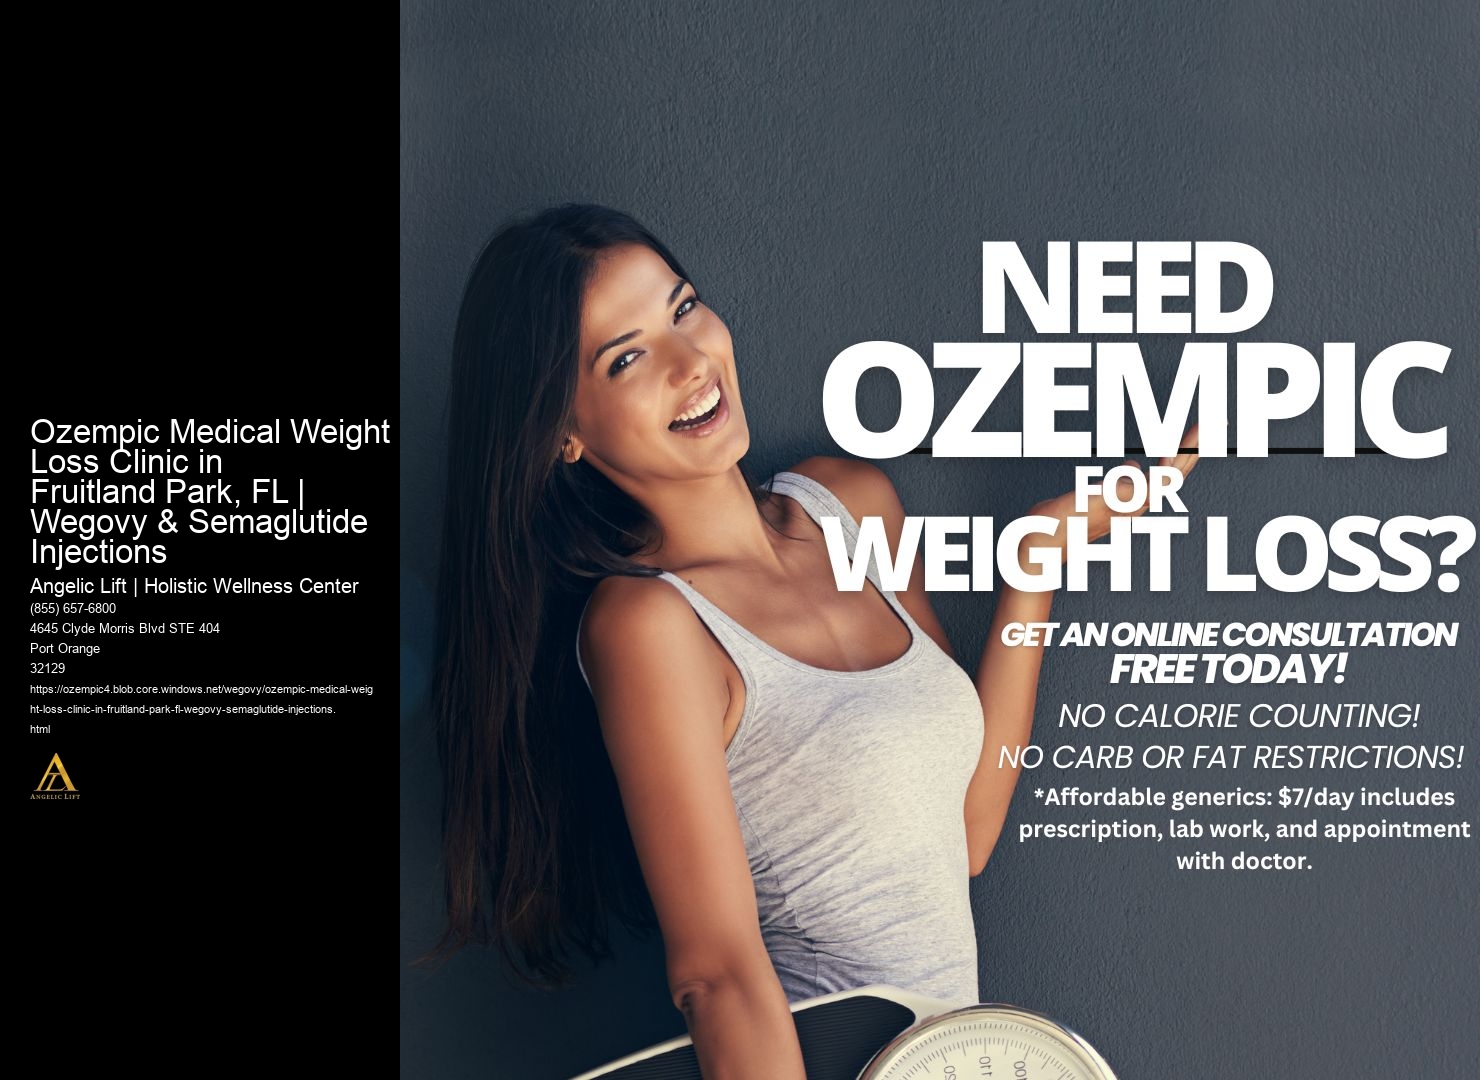 Ozempic Medical Weight Loss Clinic in Fruitland Park, FL | Wegovy & Semaglutide Injections